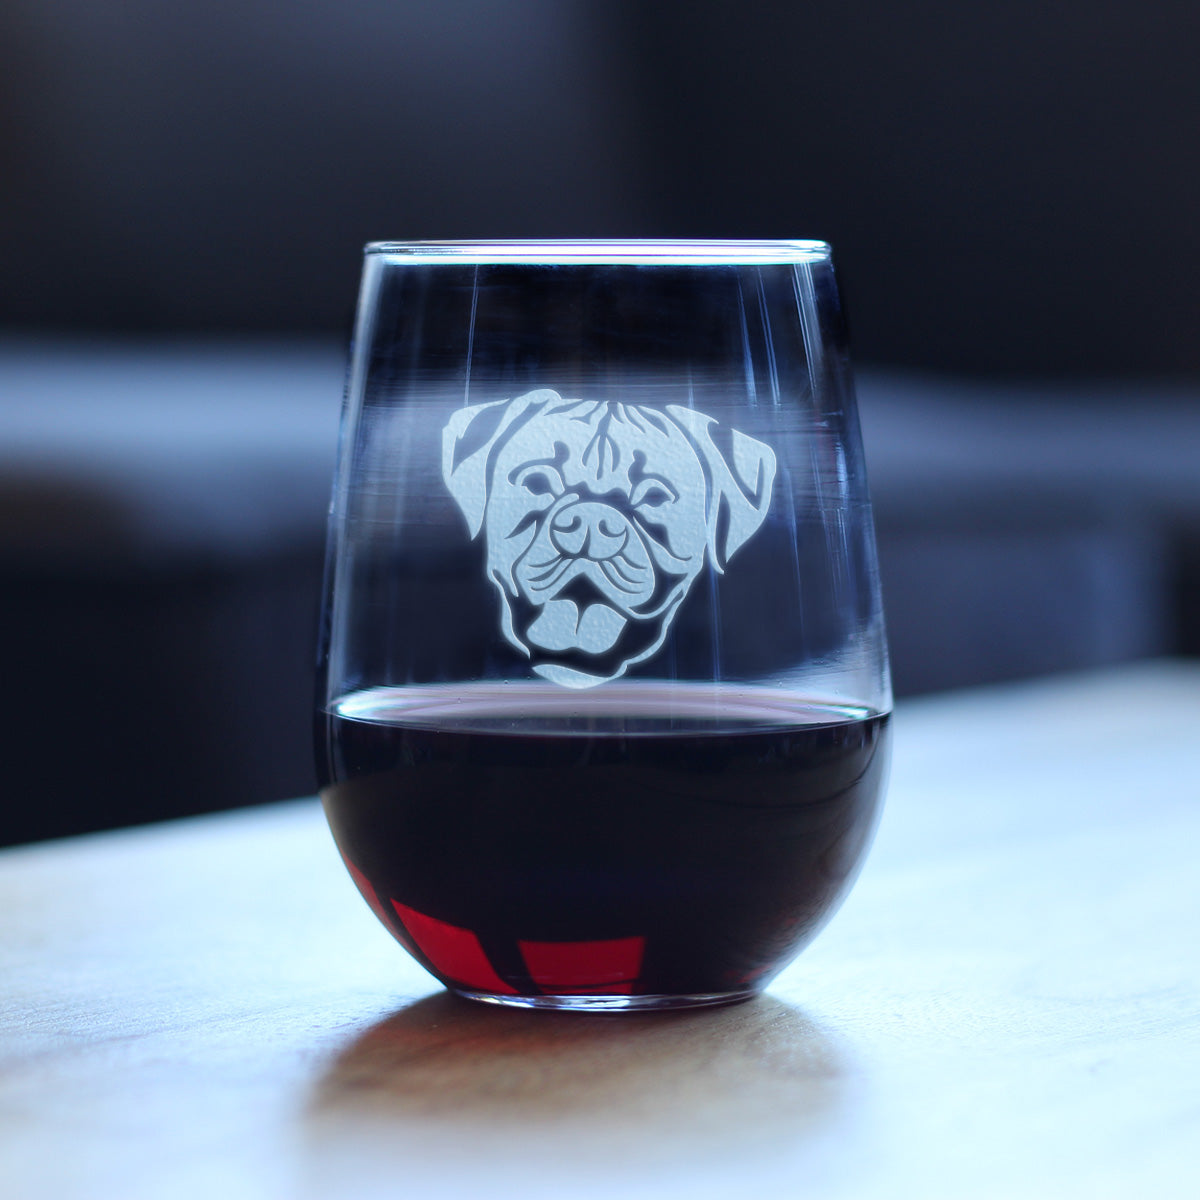 Boxer with Natural Ears - Stemless Wine Glass - Cute Boxer Themed Dog Gifts and Party Decor for Women and Men - Large Glasses